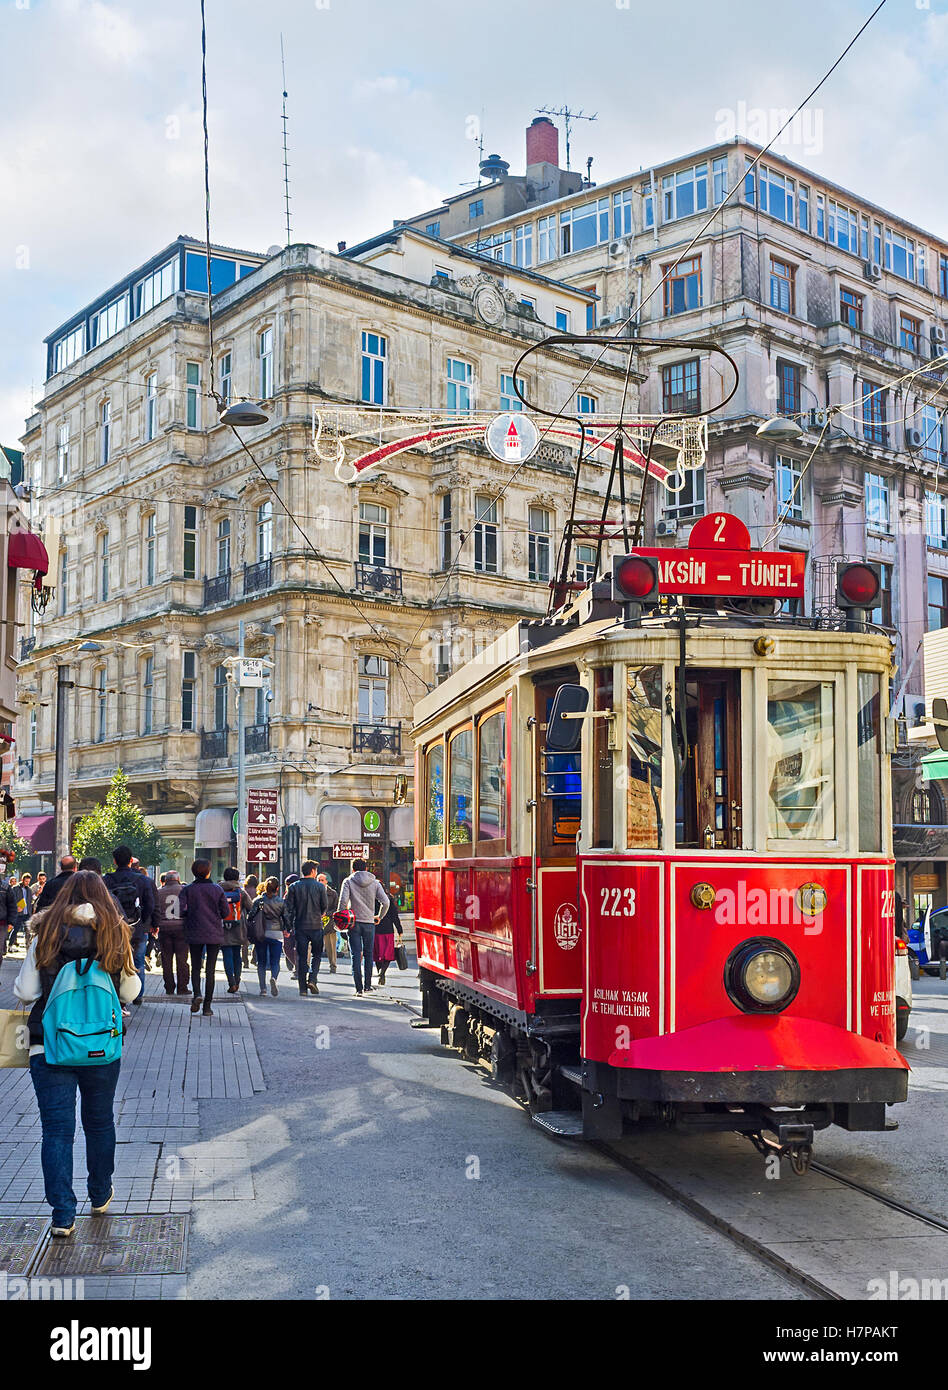 The Tunel is the last tram station in Independence Avenue, here the tram change direction and ride back to Taksim Square Stock Photo